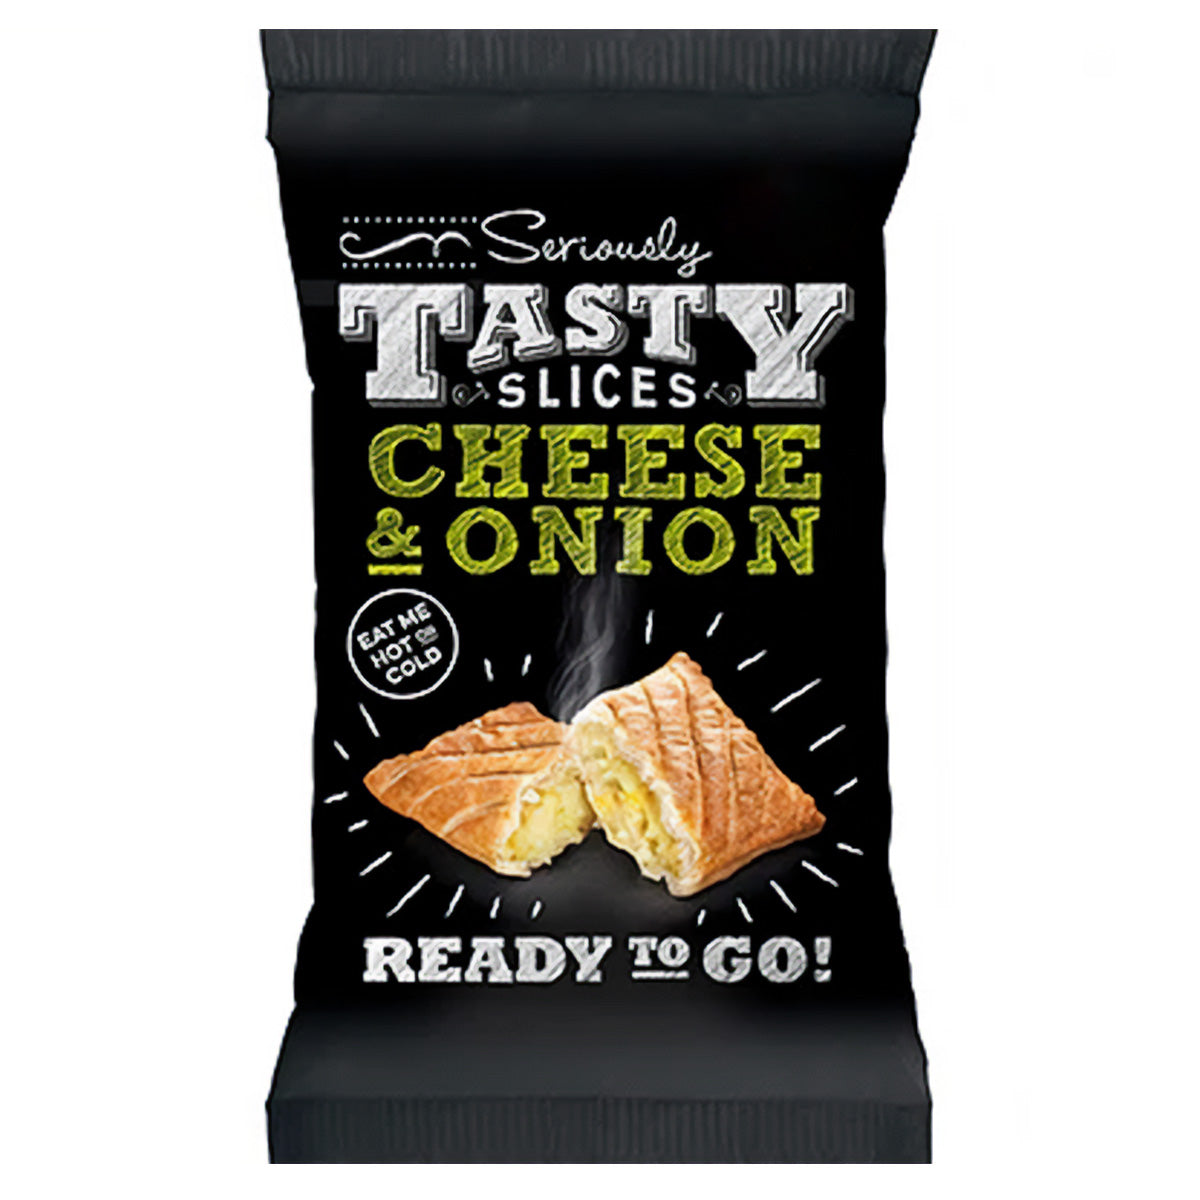 Seriously Tasty - Cheese And Onion Slice Rolls - 150g - Continental Food Store